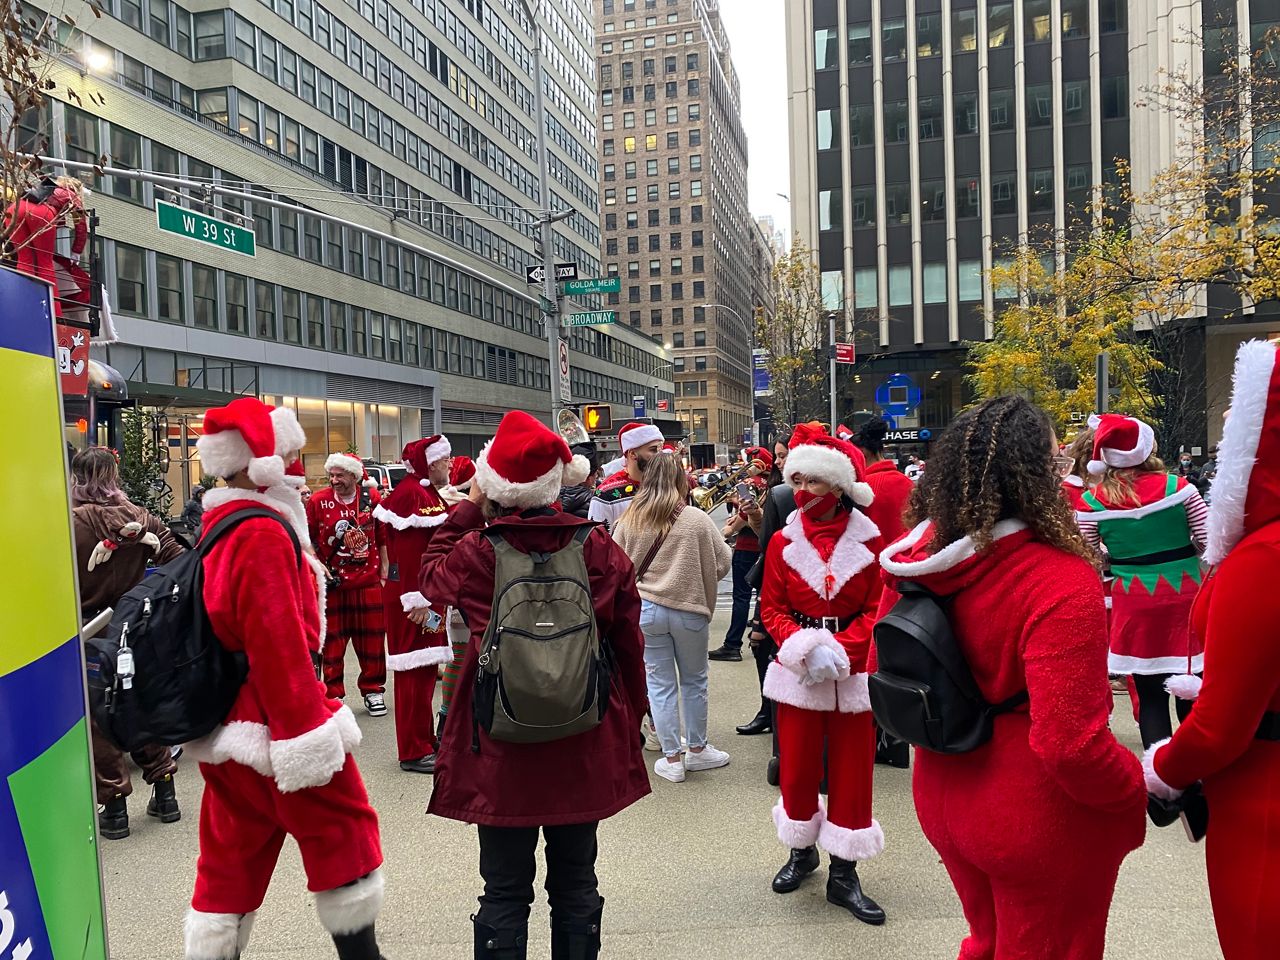 After 12 months off because of COVID, SantaCon returns to the town